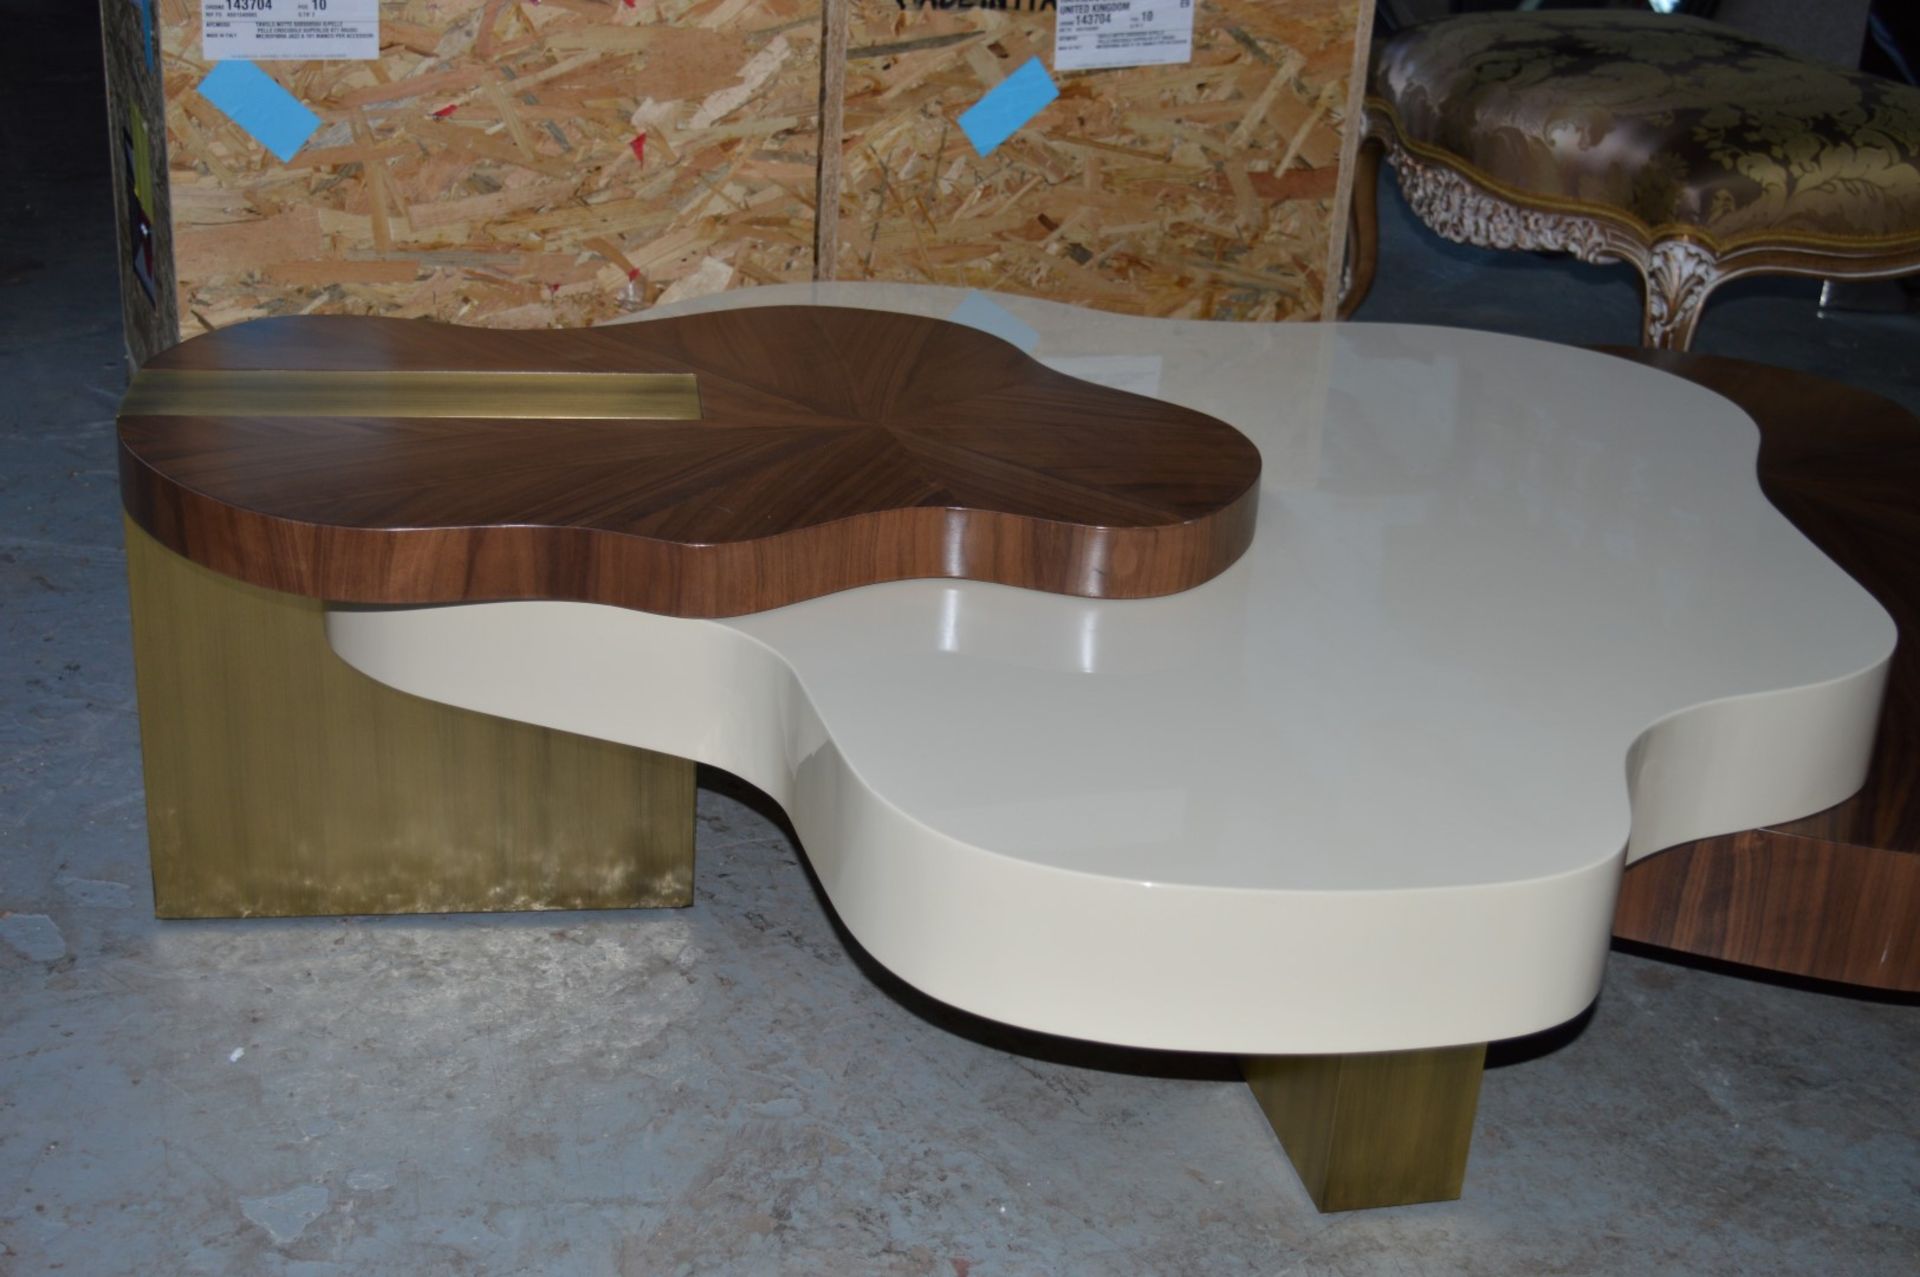 1 x Ginger & Jagger Nenhuphar Coffee Table - Urbanmint Design - Eye Catching Design - Walnut and - Image 3 of 15